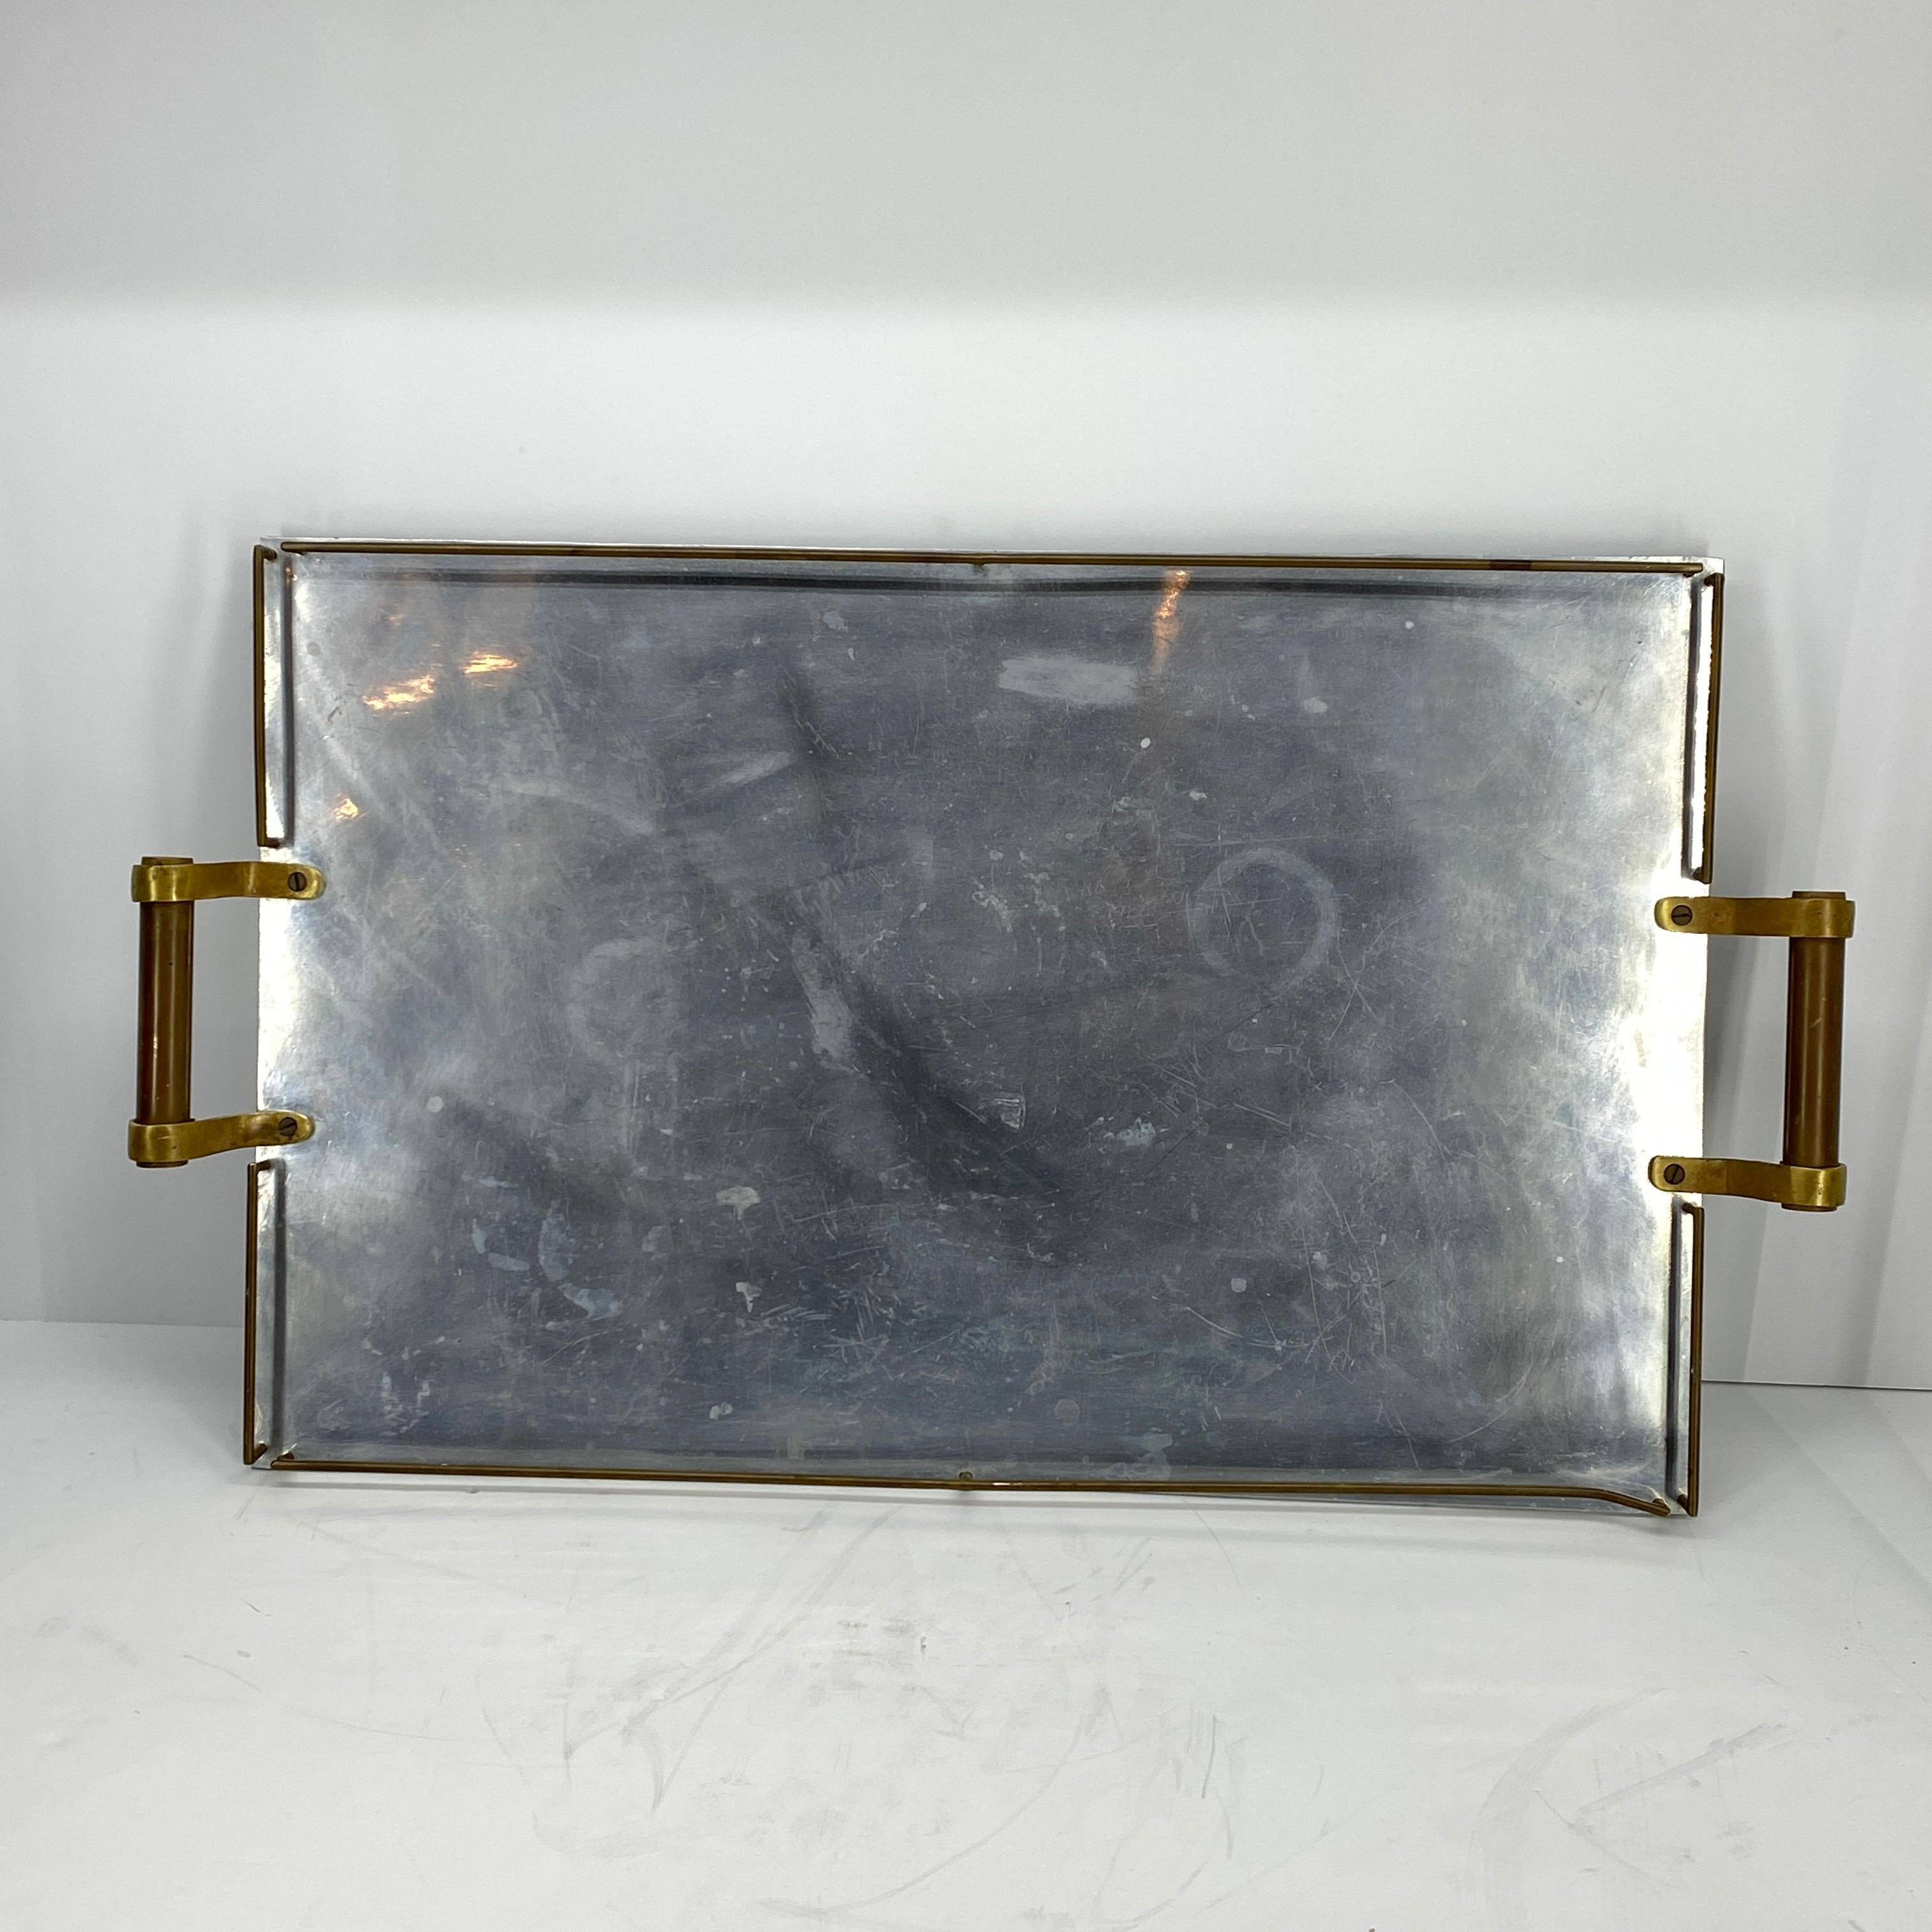 French Large Maison Jansen Chrome Serving Tray with Brass Handles and Hardware